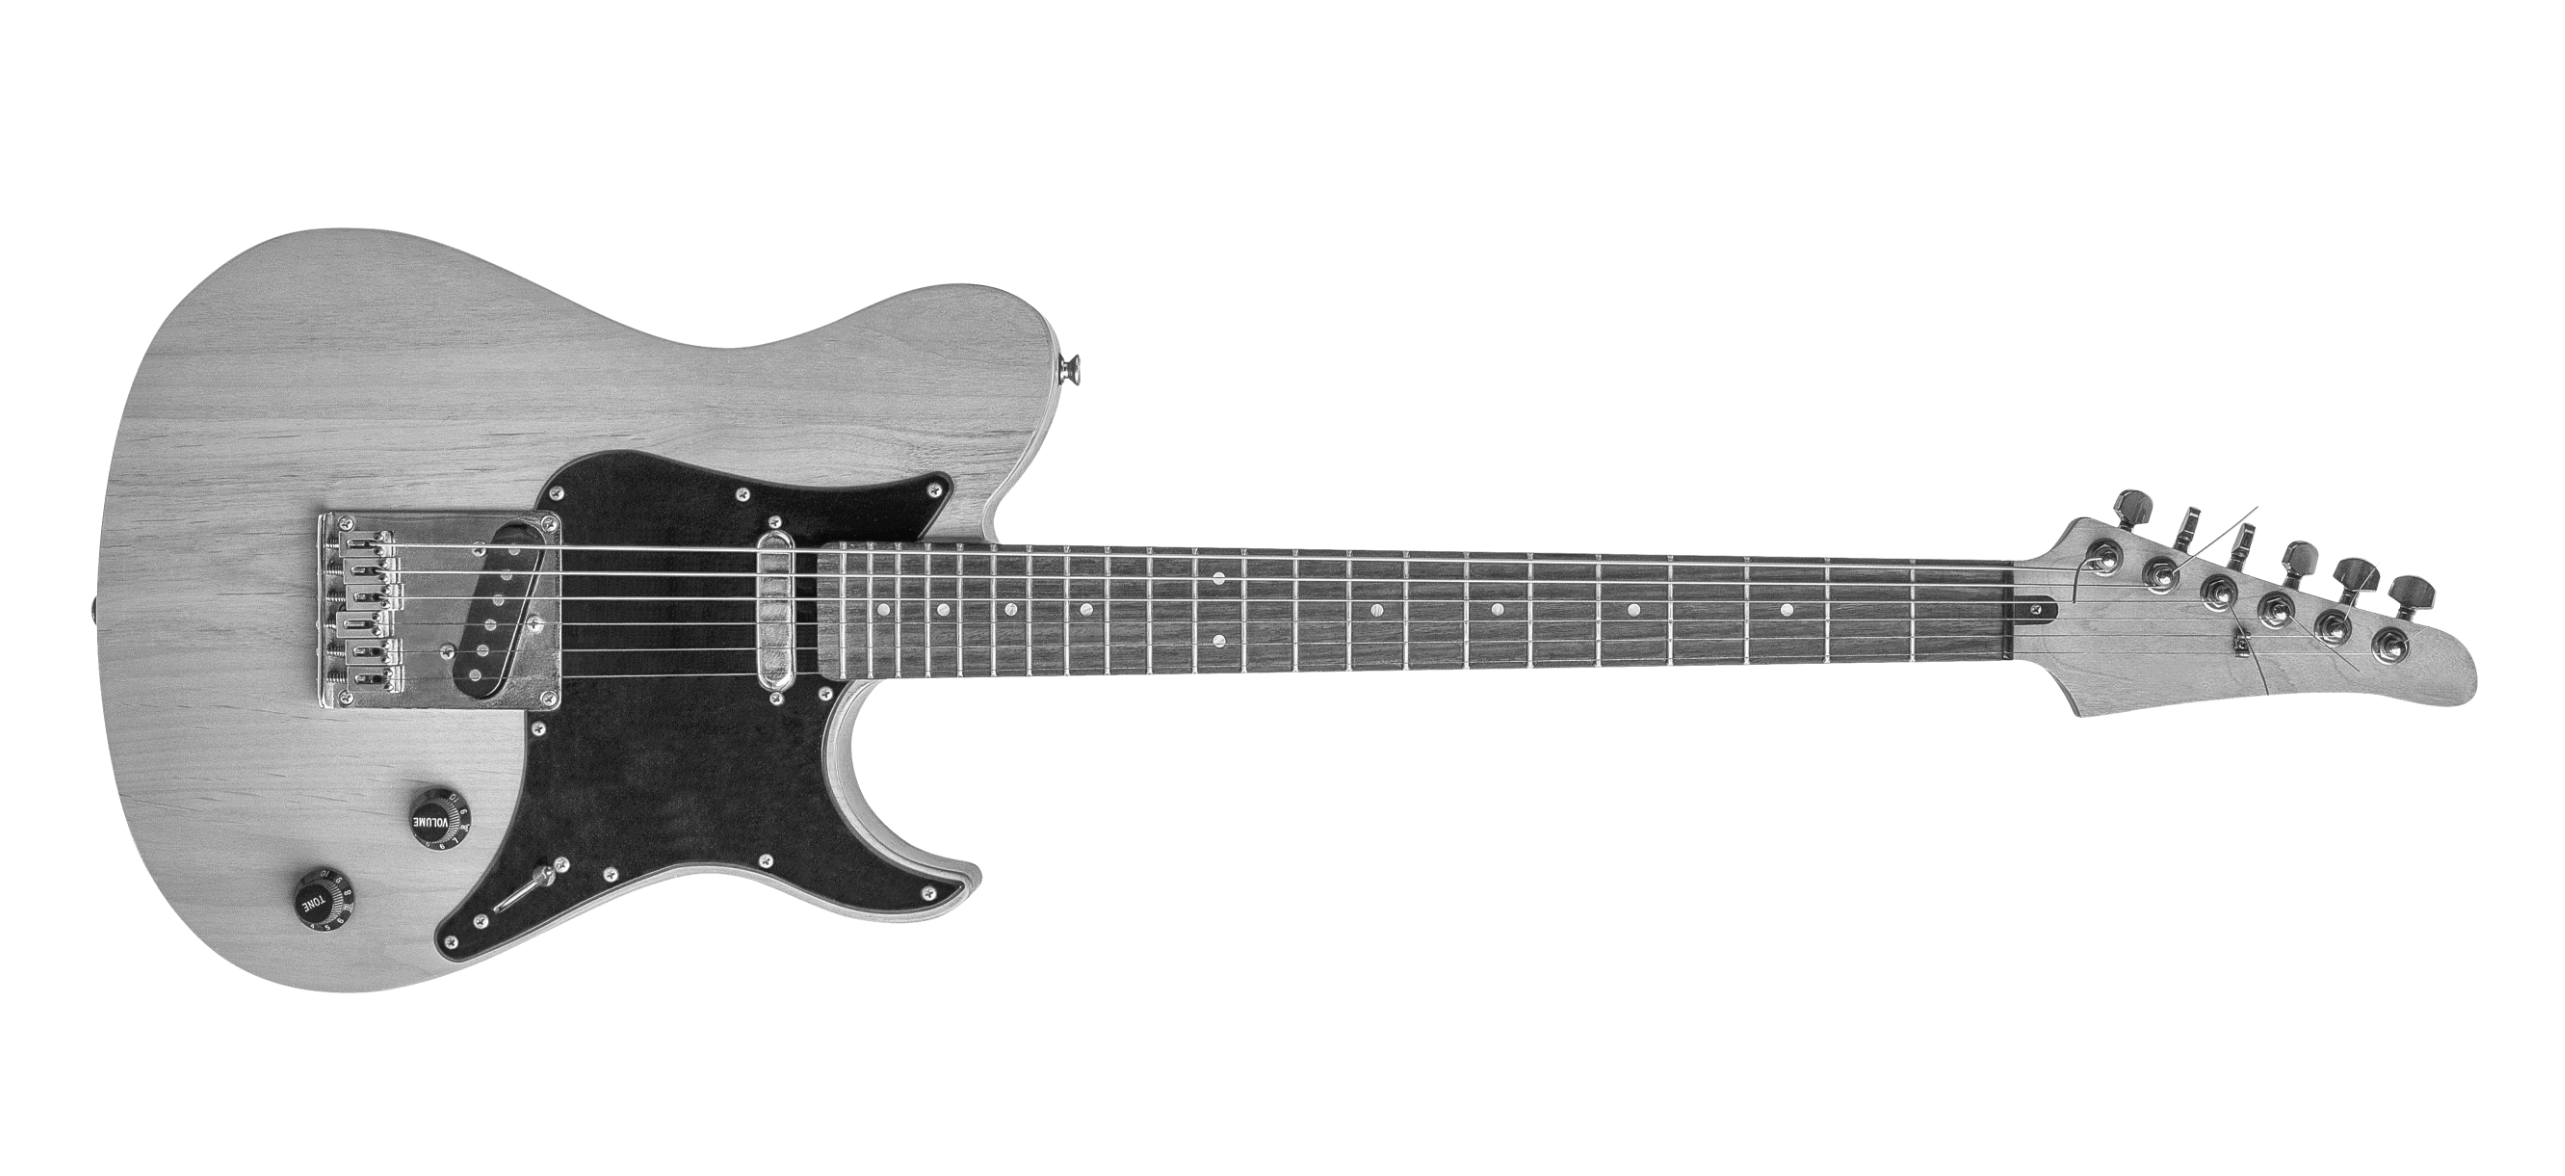 A black and white photo of an electric guitar in McKinney, Texas.